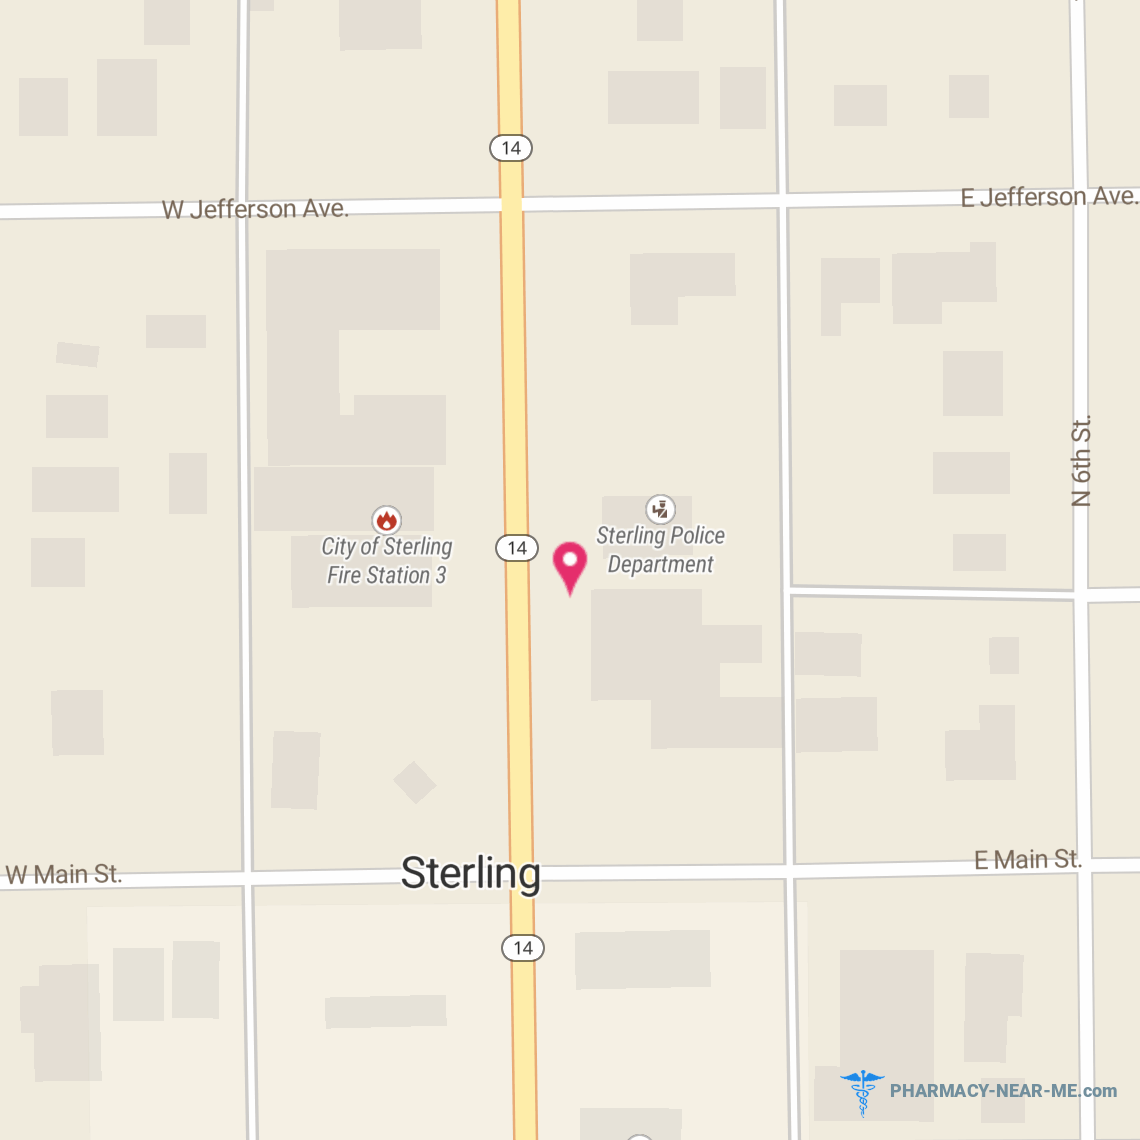 STERLING PHARMACY INC - Pharmacy Hours, Phone, Reviews & Information: 118 South Broadway Avenue, Sterling, Kansas 67579, United States